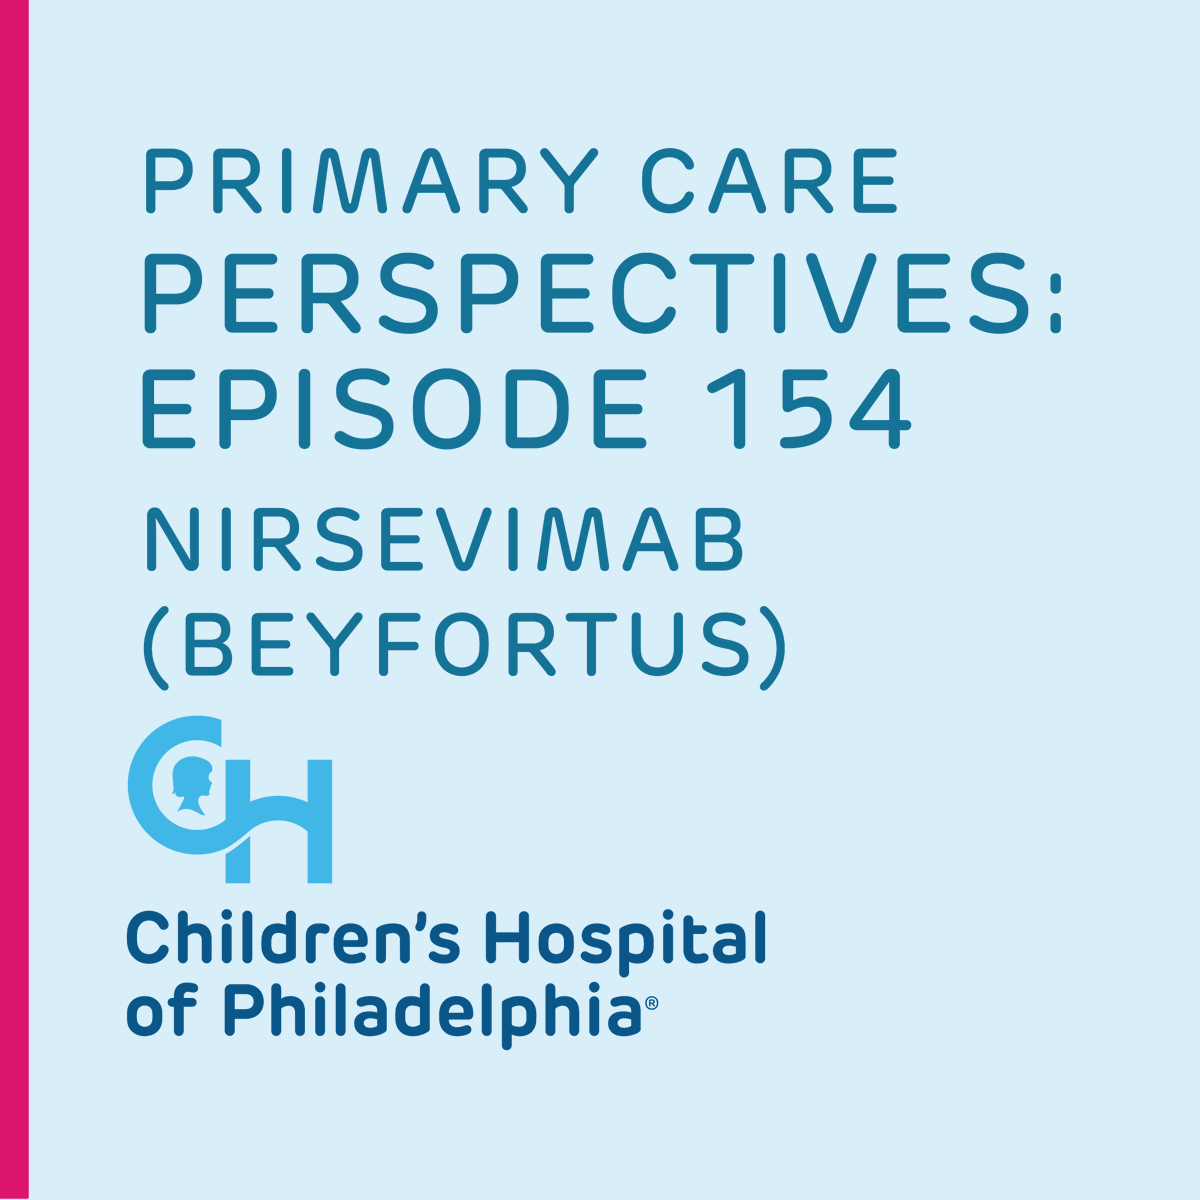 For the first time, a preventative medicine is available to protect infants & high-risk toddlers from #RSV. In this episode of the Primary Care Perspectives #podcast, hear about the science behind the monoclonal antibody nirsevimab (Beyfortus). Listen: ms.spr.ly/601999ZQf.